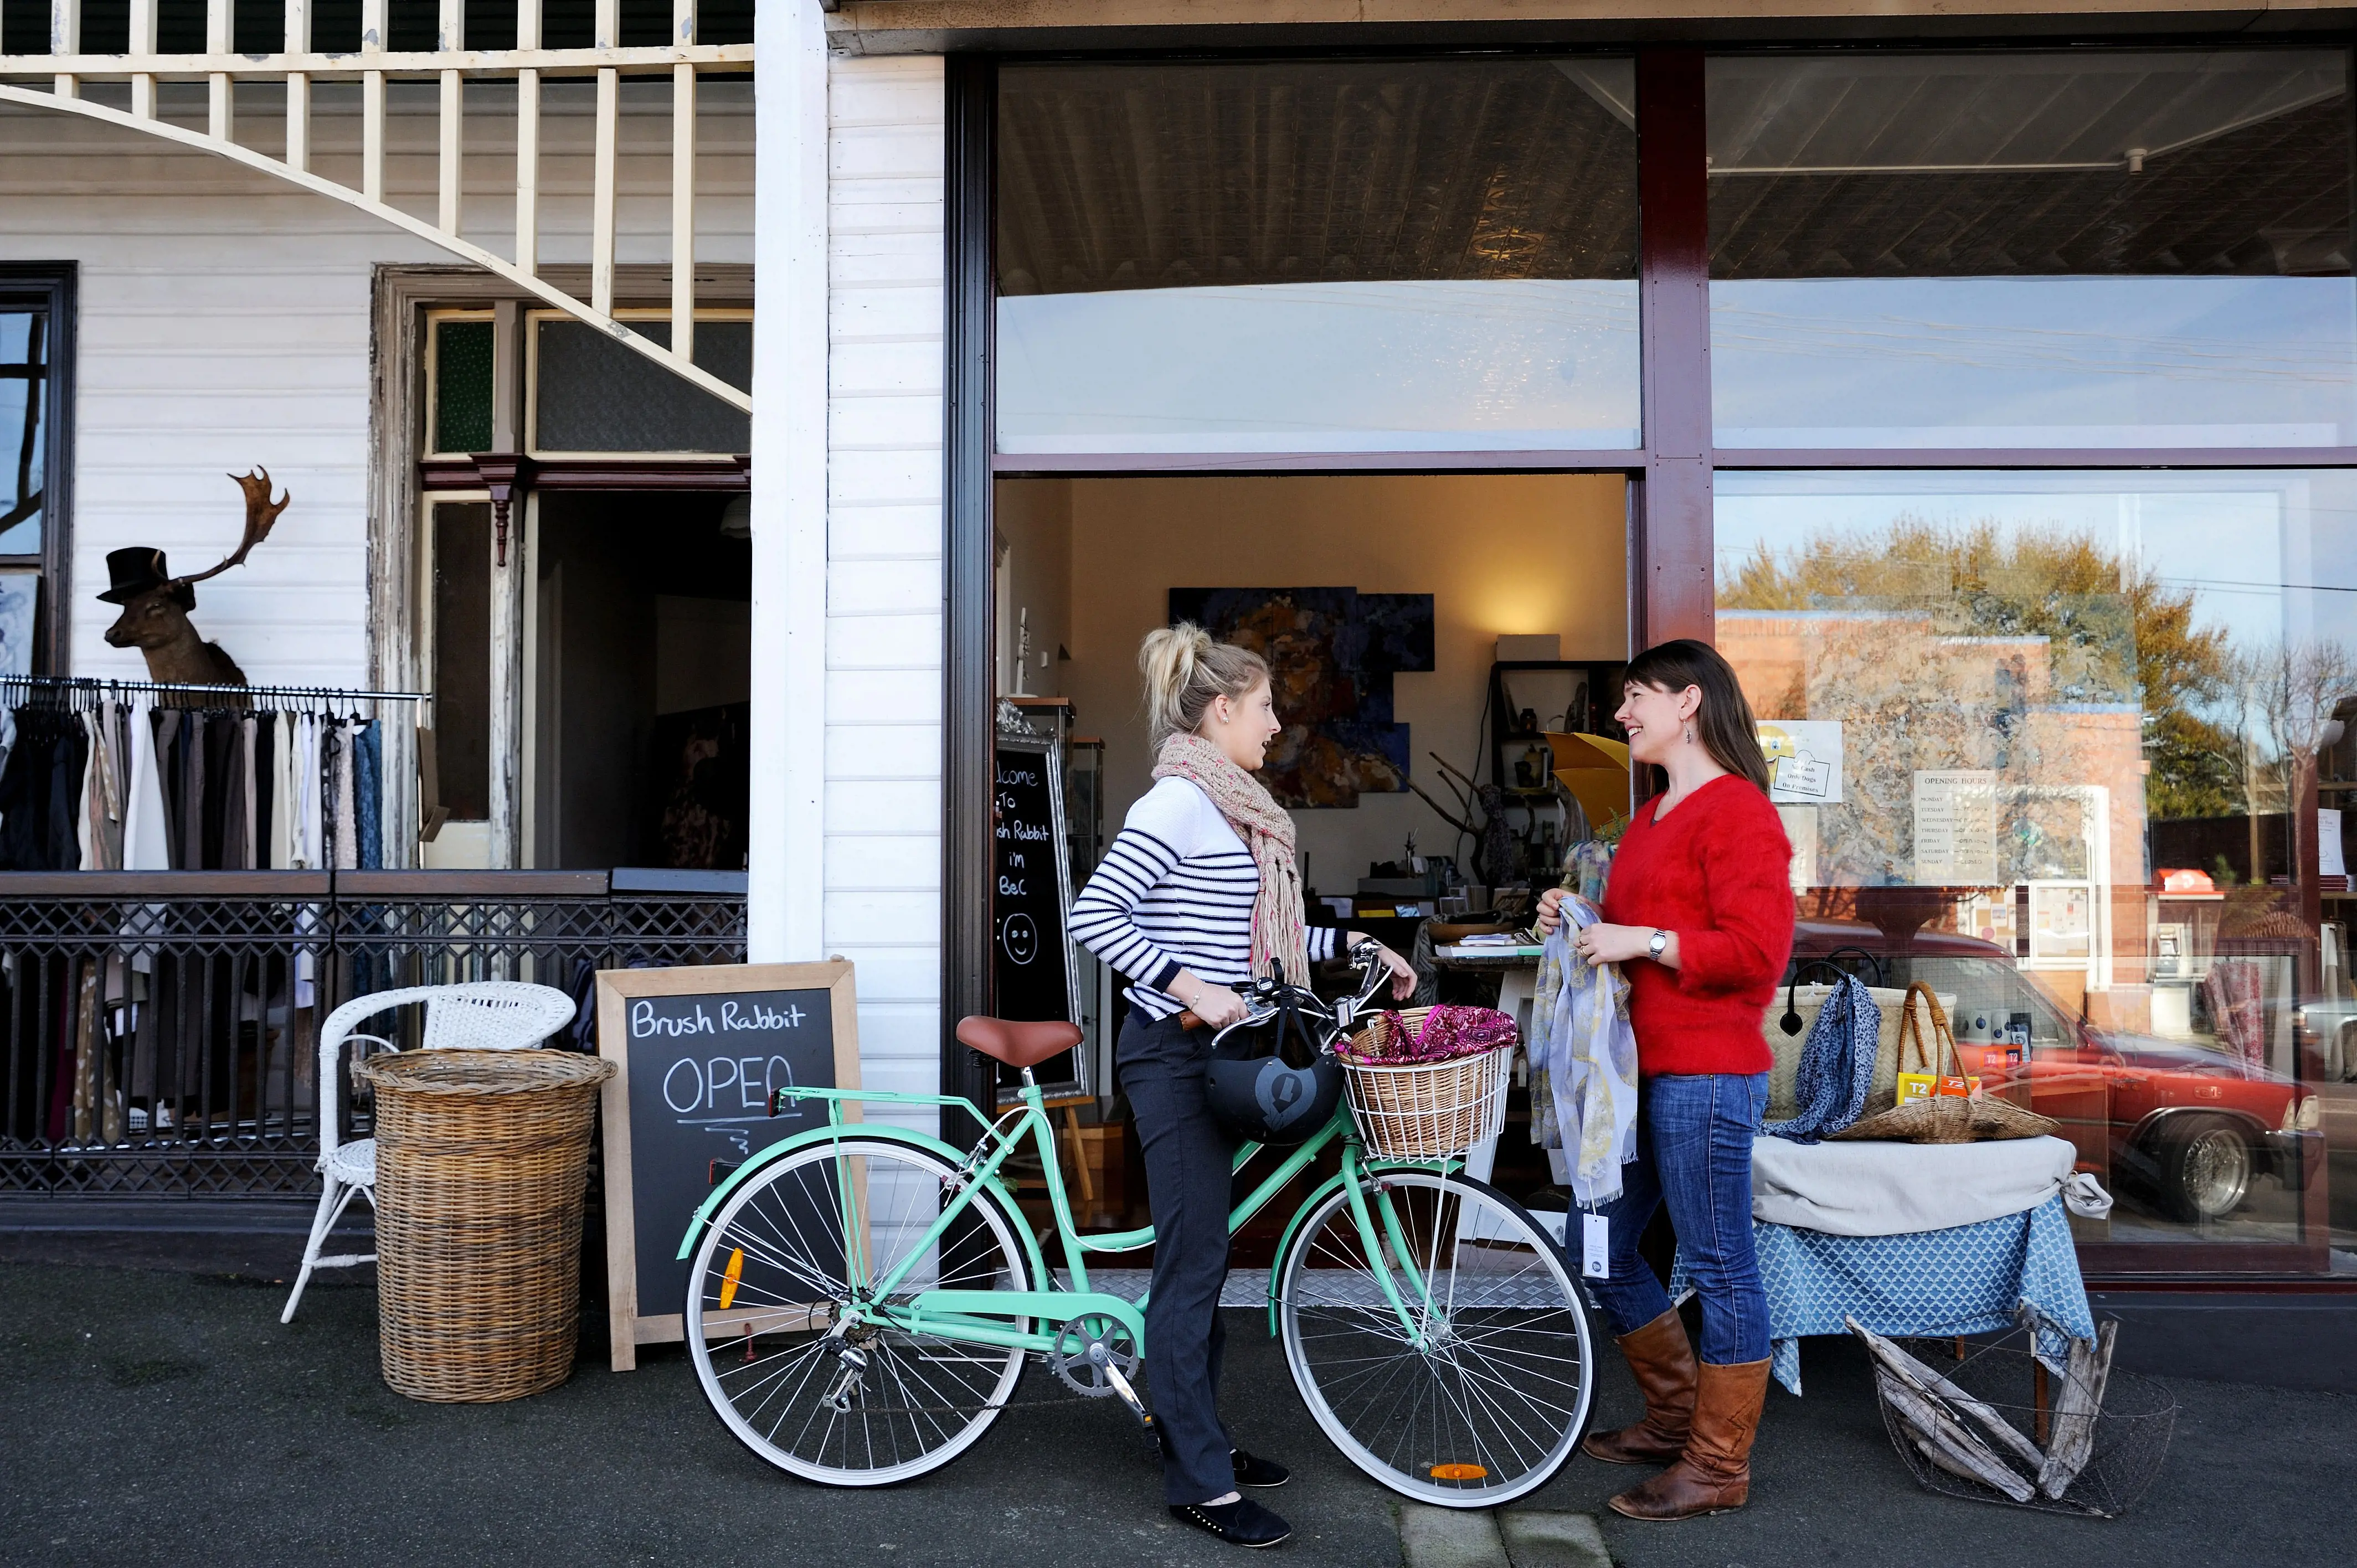 A woman in a striped top stops her bicycle to chat to a woman in a red top outside a Deloraine shop.